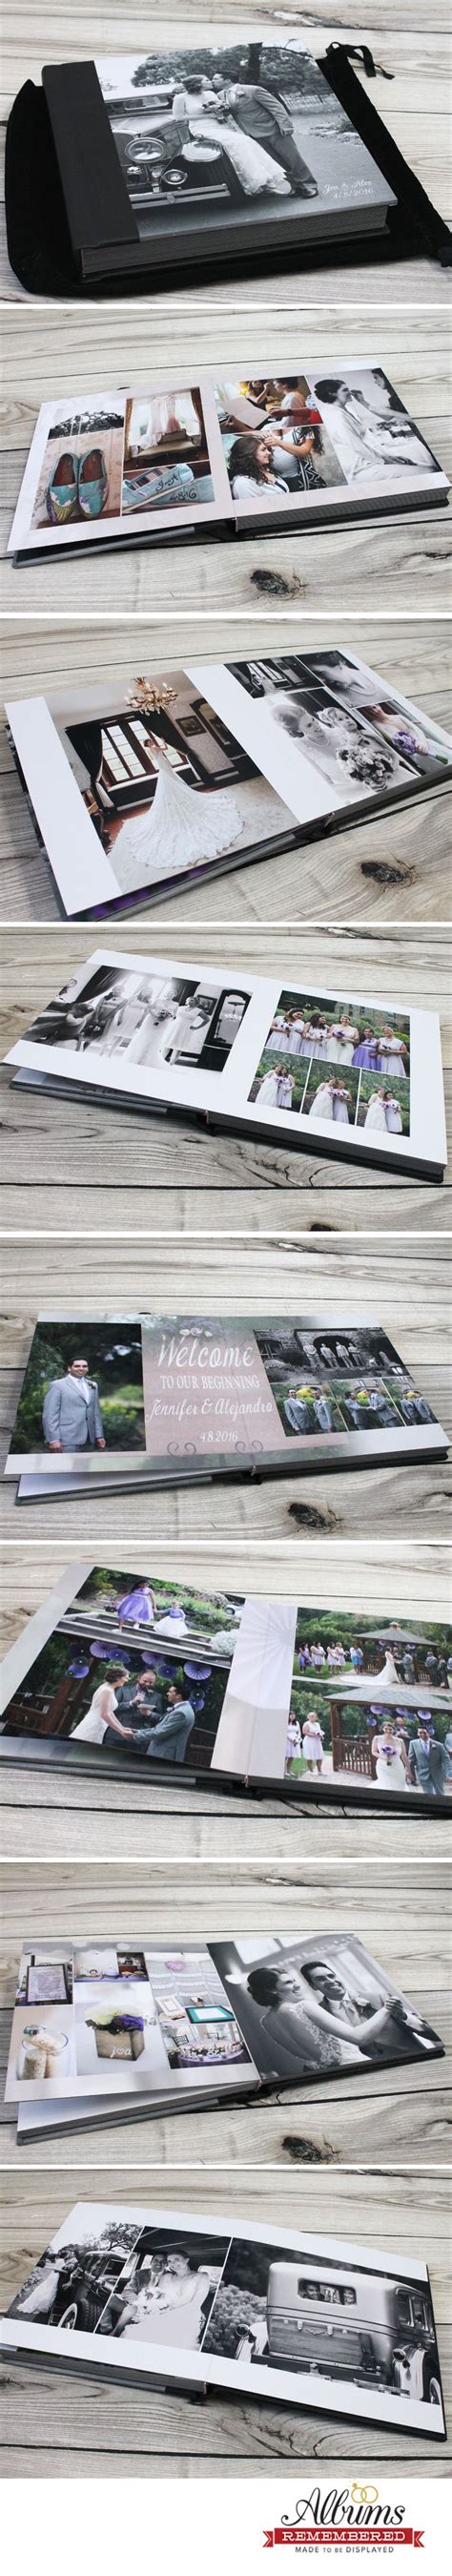 Albums Remembered Offers Professional Custom Wedding Albums At An